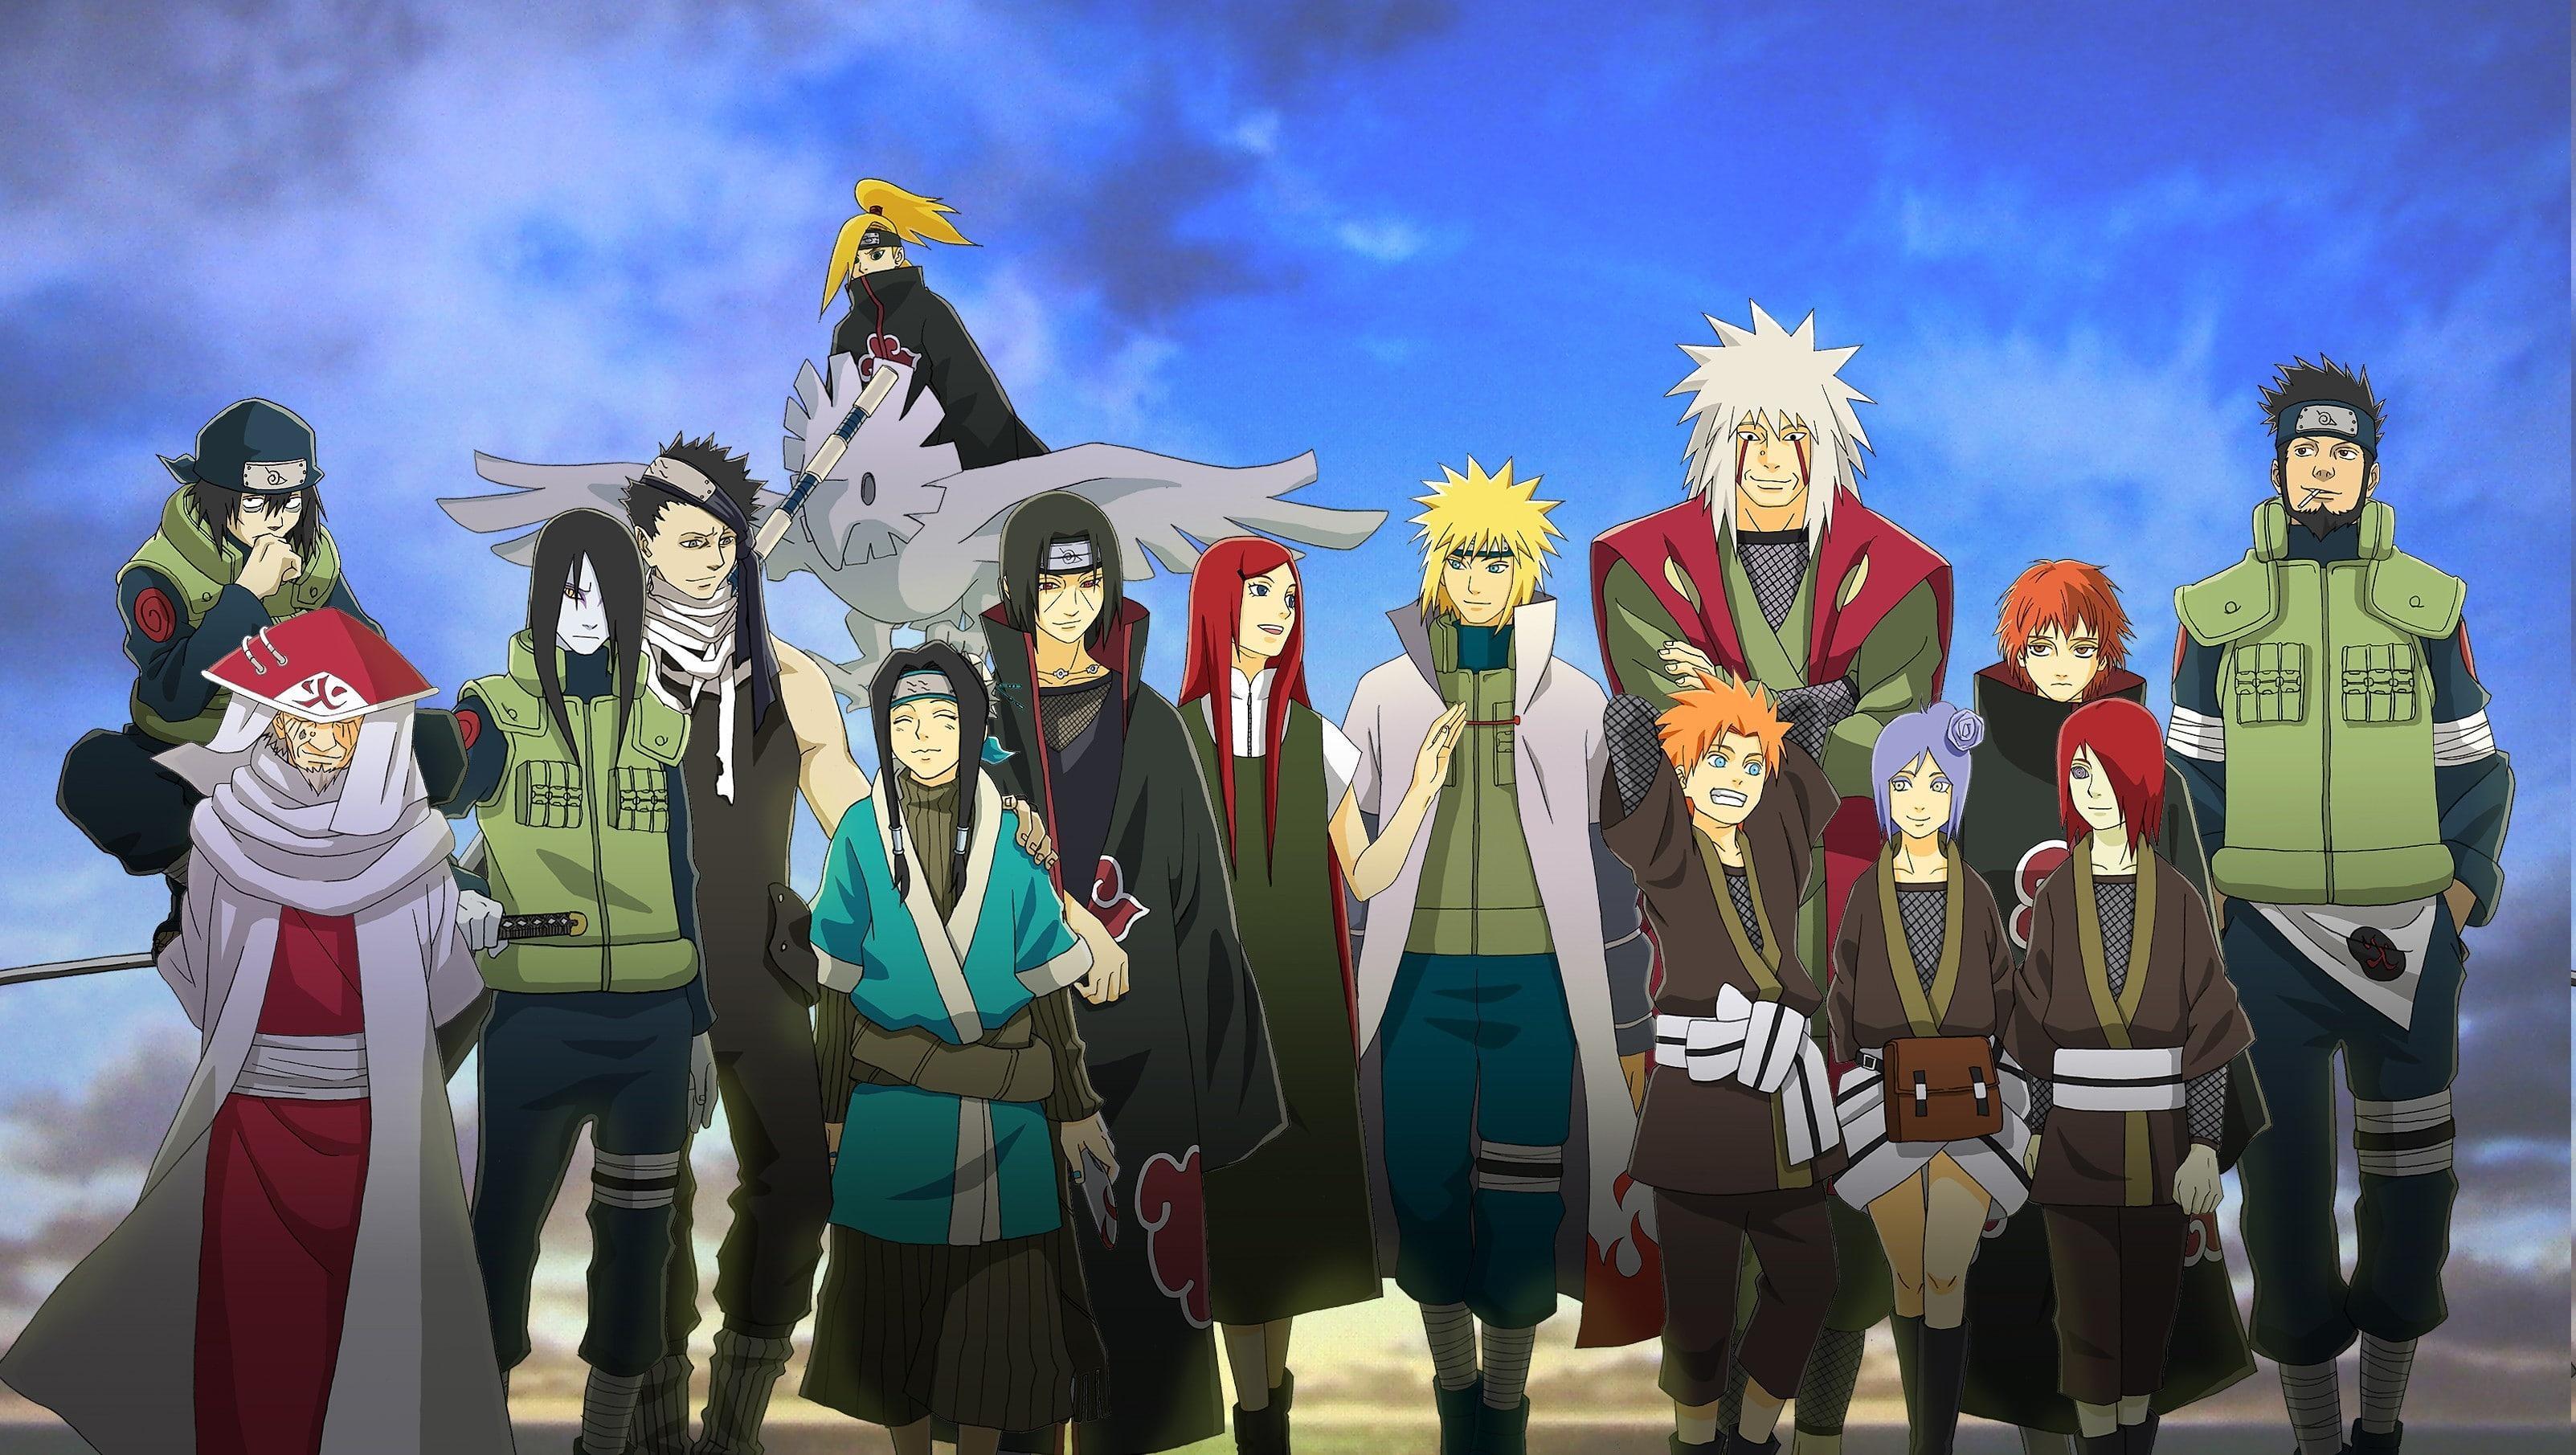 Naruto and Friends Wallpapers - Top Free Naruto and Friends Backgrounds